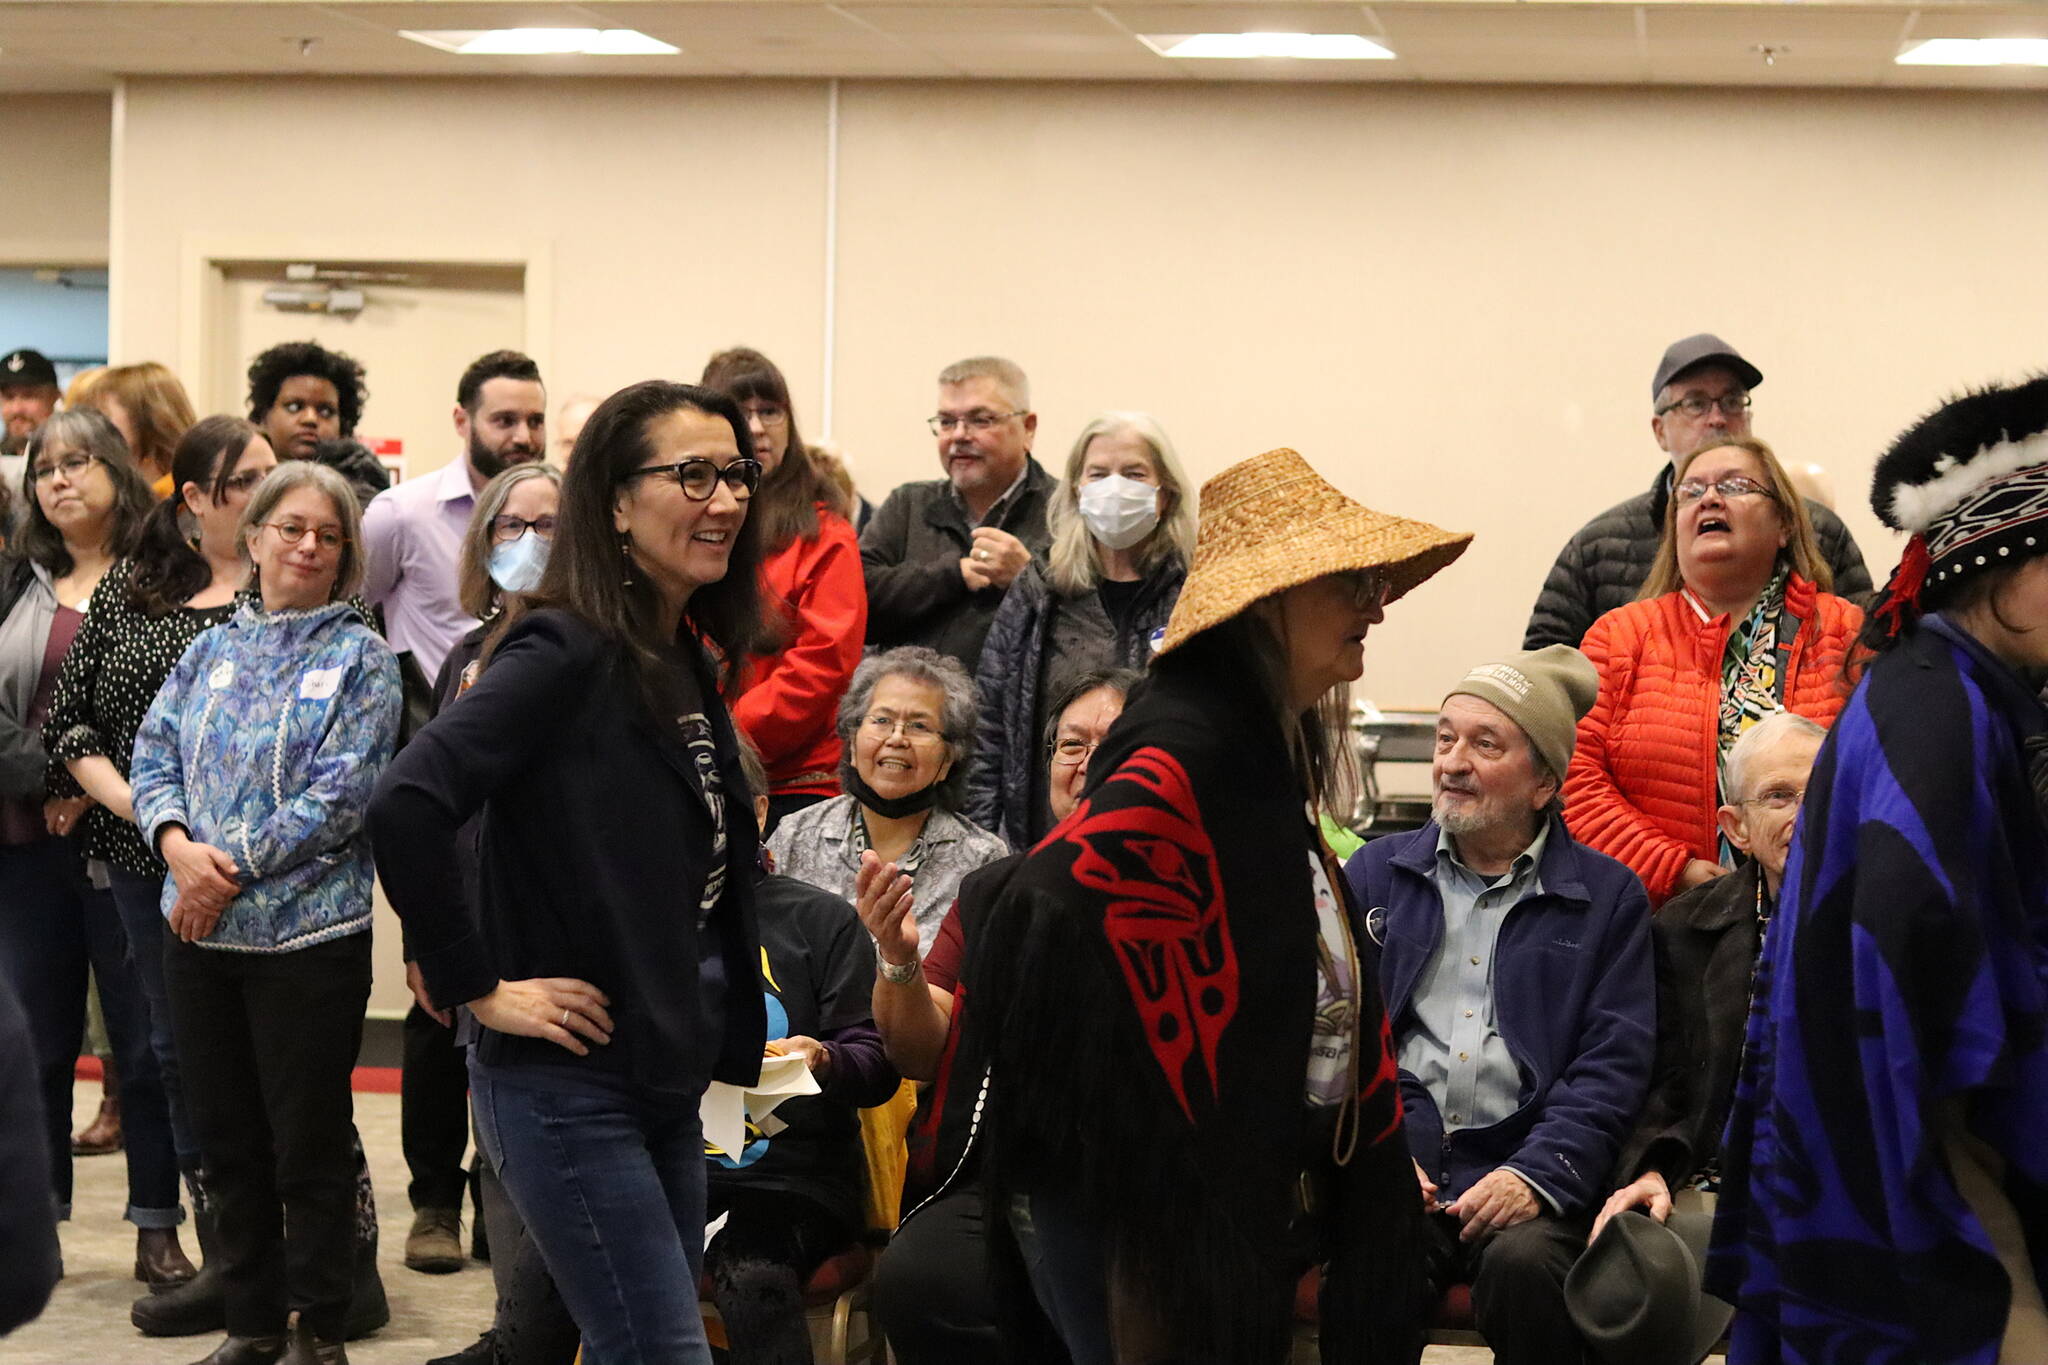 U.S. Rep. Mary Peltola performs an entrance dance with other Alaska Natives at the start of a reelection campaign event at Elizabeth Peratrovich Hall on Monday. The event came two after the Alaska Federation of Natives convention in Anchorage, where she received a hero’s welcome by attendees and the support of longtime Republican U.S. Sen. Lisa Murkowski. (Mark Sabbatini / Juneau Empire)